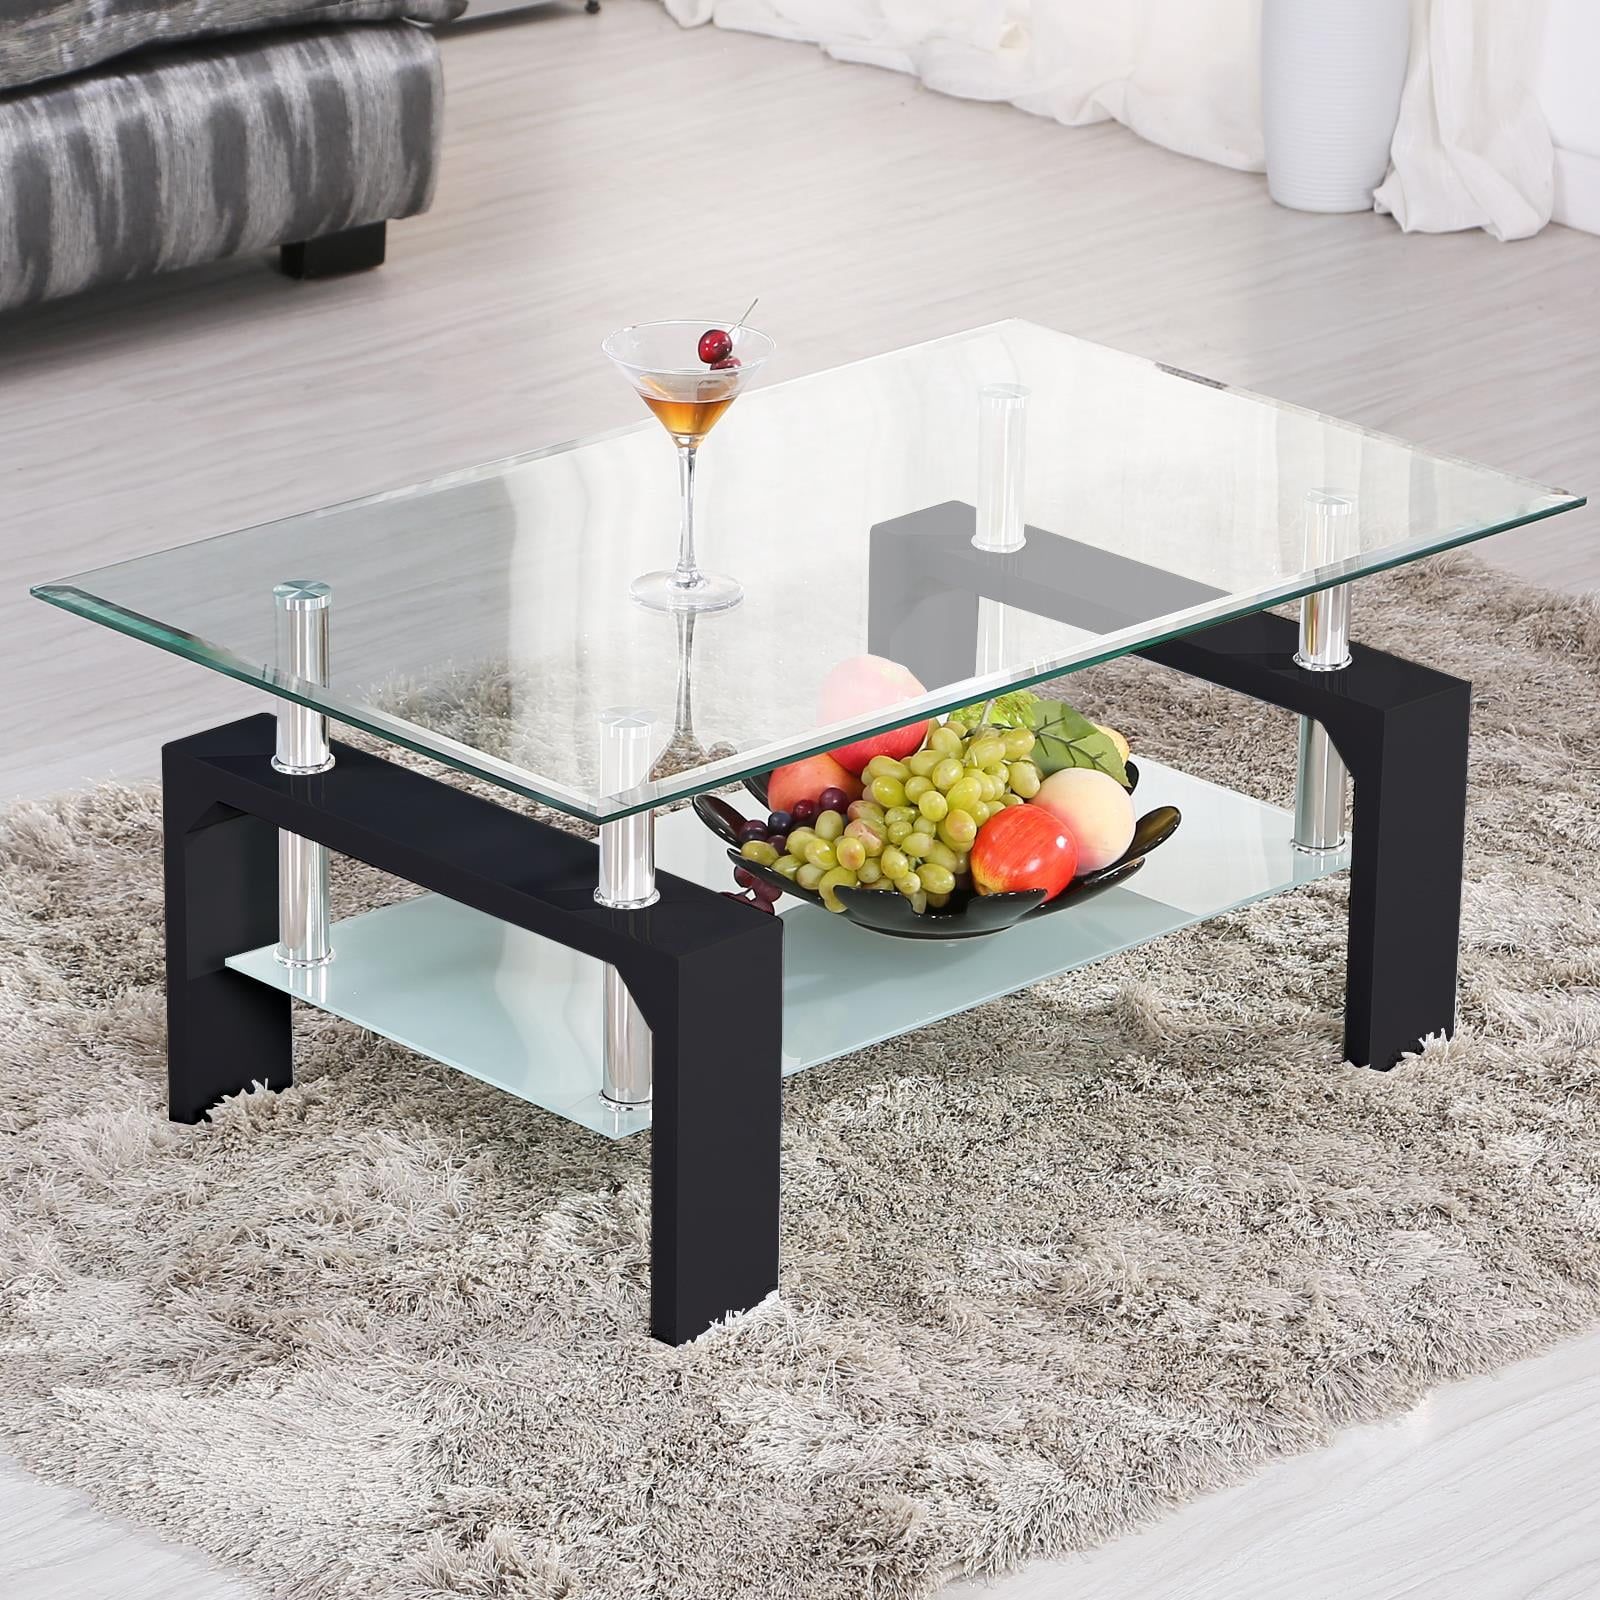 Ktaxon Rectangular Glass Coffee Table Shelf Wood Living Room Furniture In Rectangular Coffee Tables With Pedestal Bases (View 14 of 15)